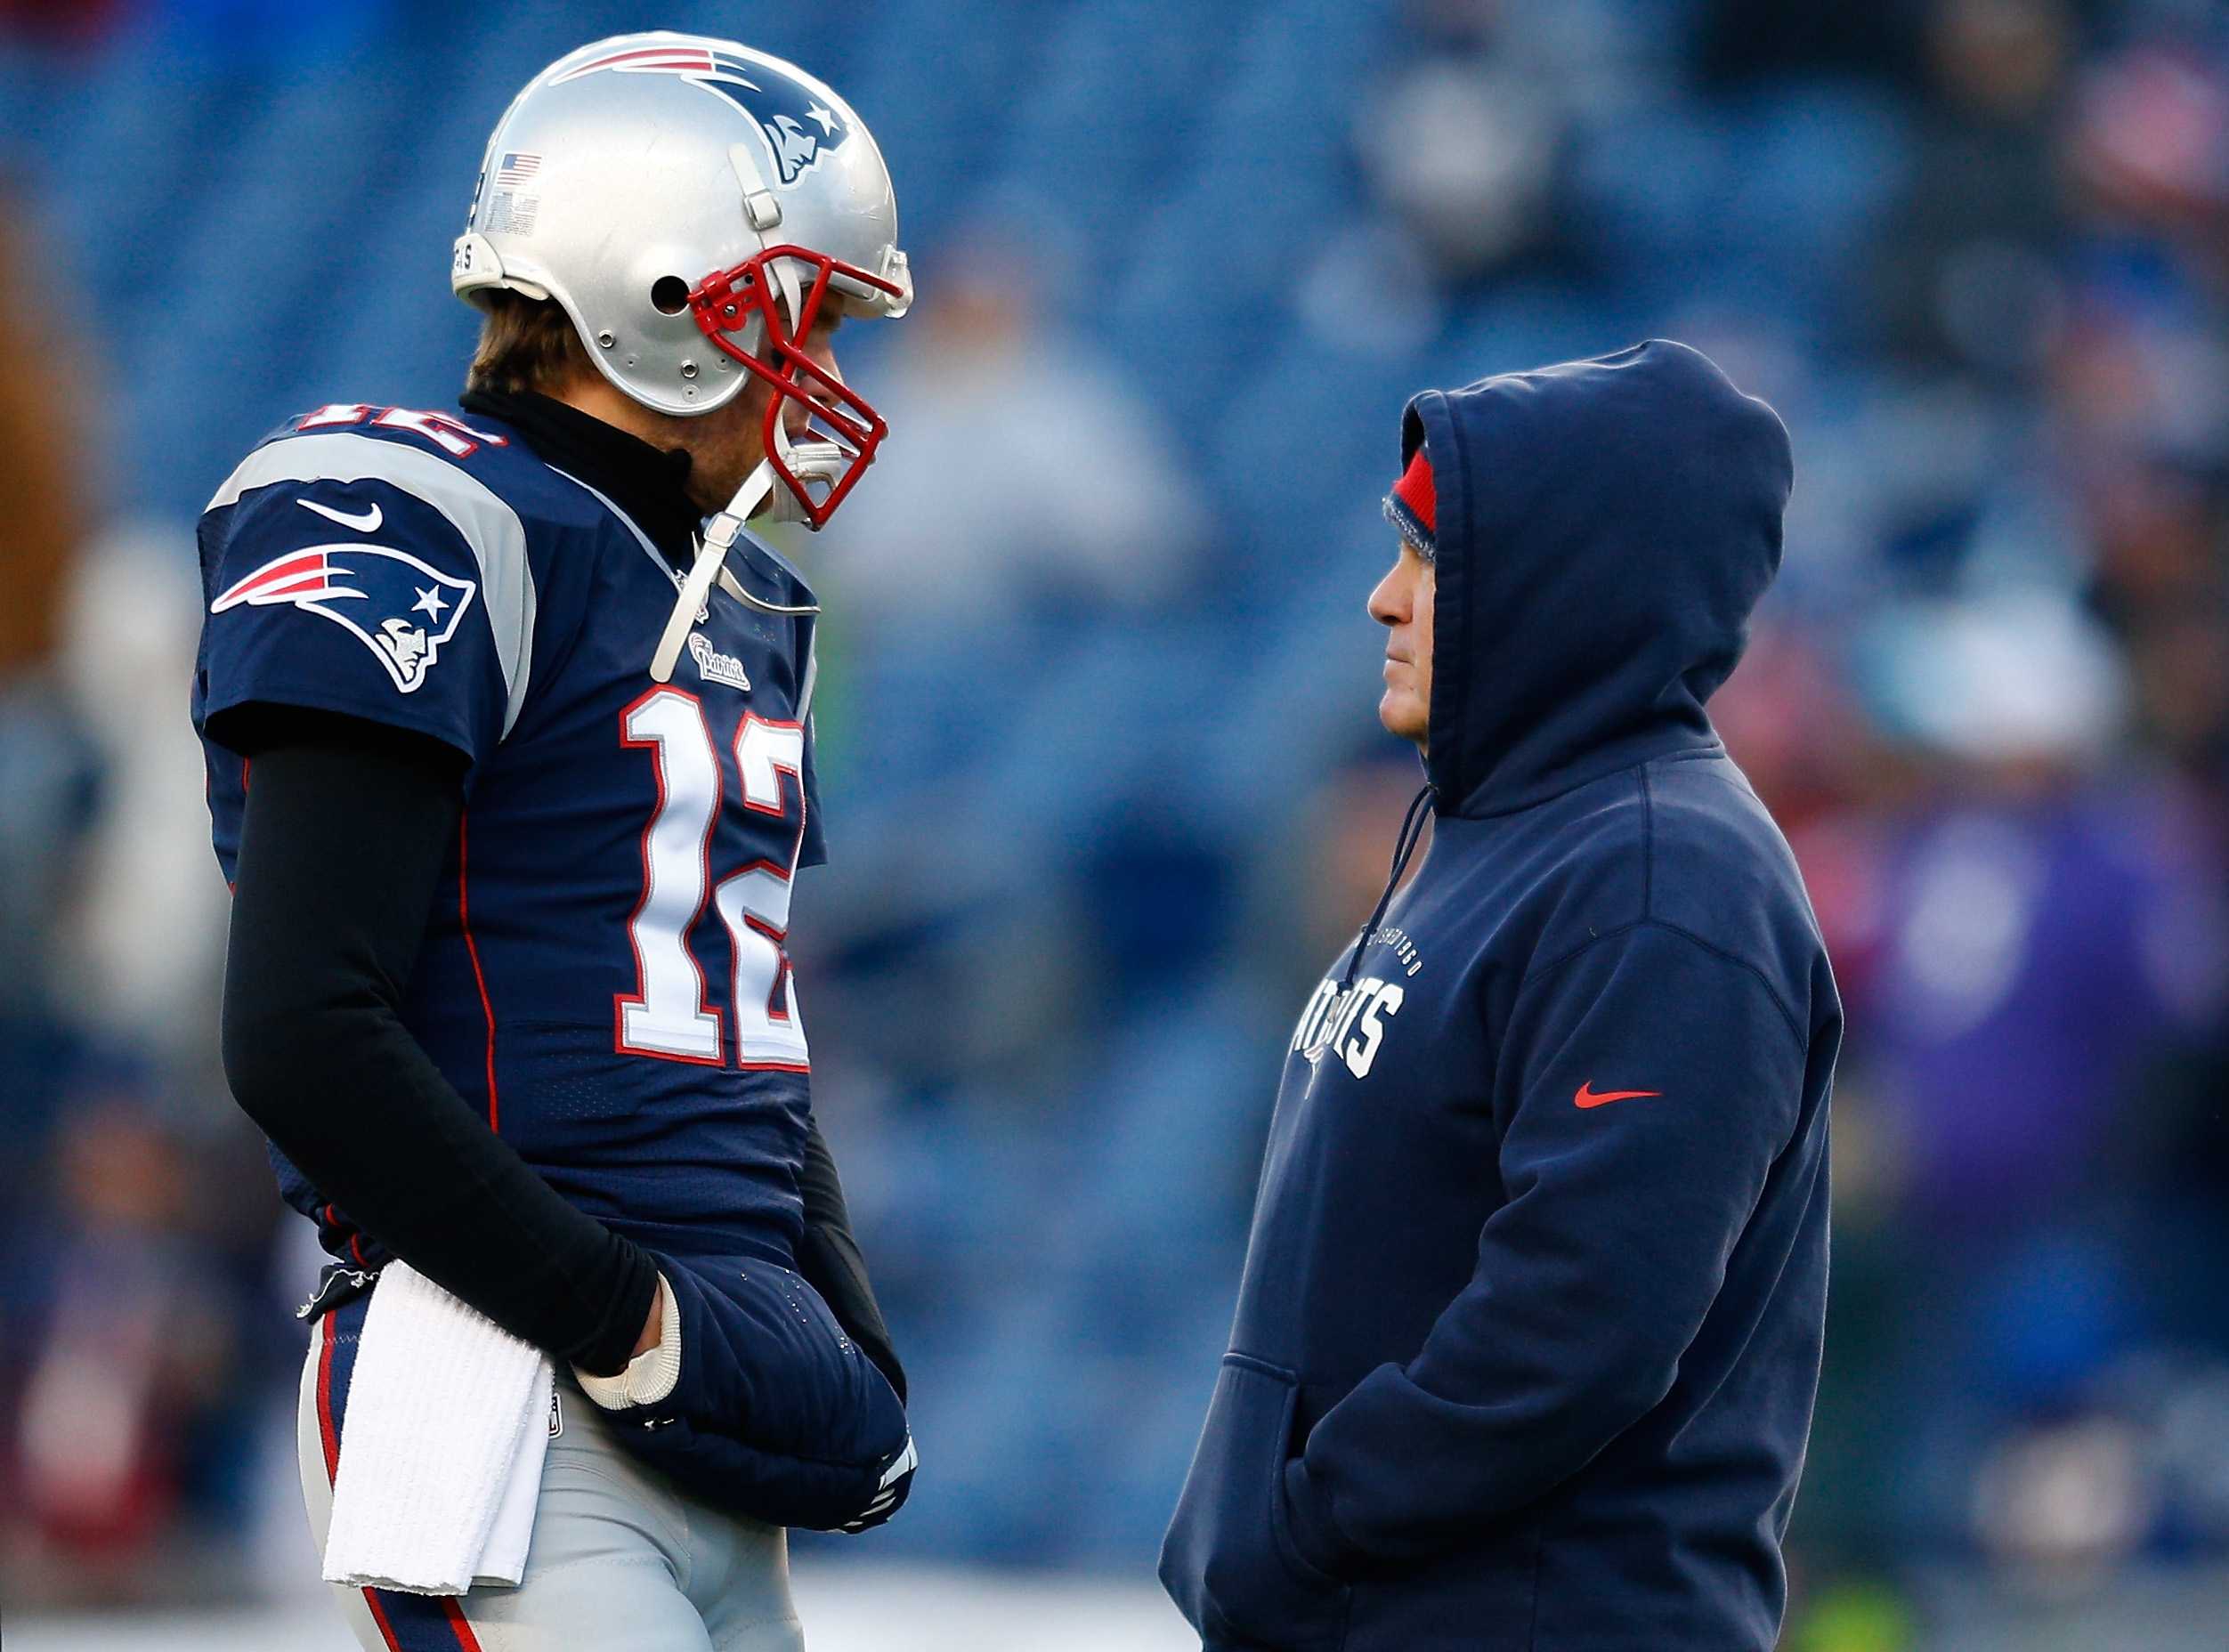 Tom Brady #12 and head coach Bill Belichick of the New England Patriots talk before the 2014 AFC Divisional Playoffs game against the Baltimore Ravens at Gillette Stadium on January 10, 2015 in Foxboro, Massachusetts (Jim Rogash—Getty Images)